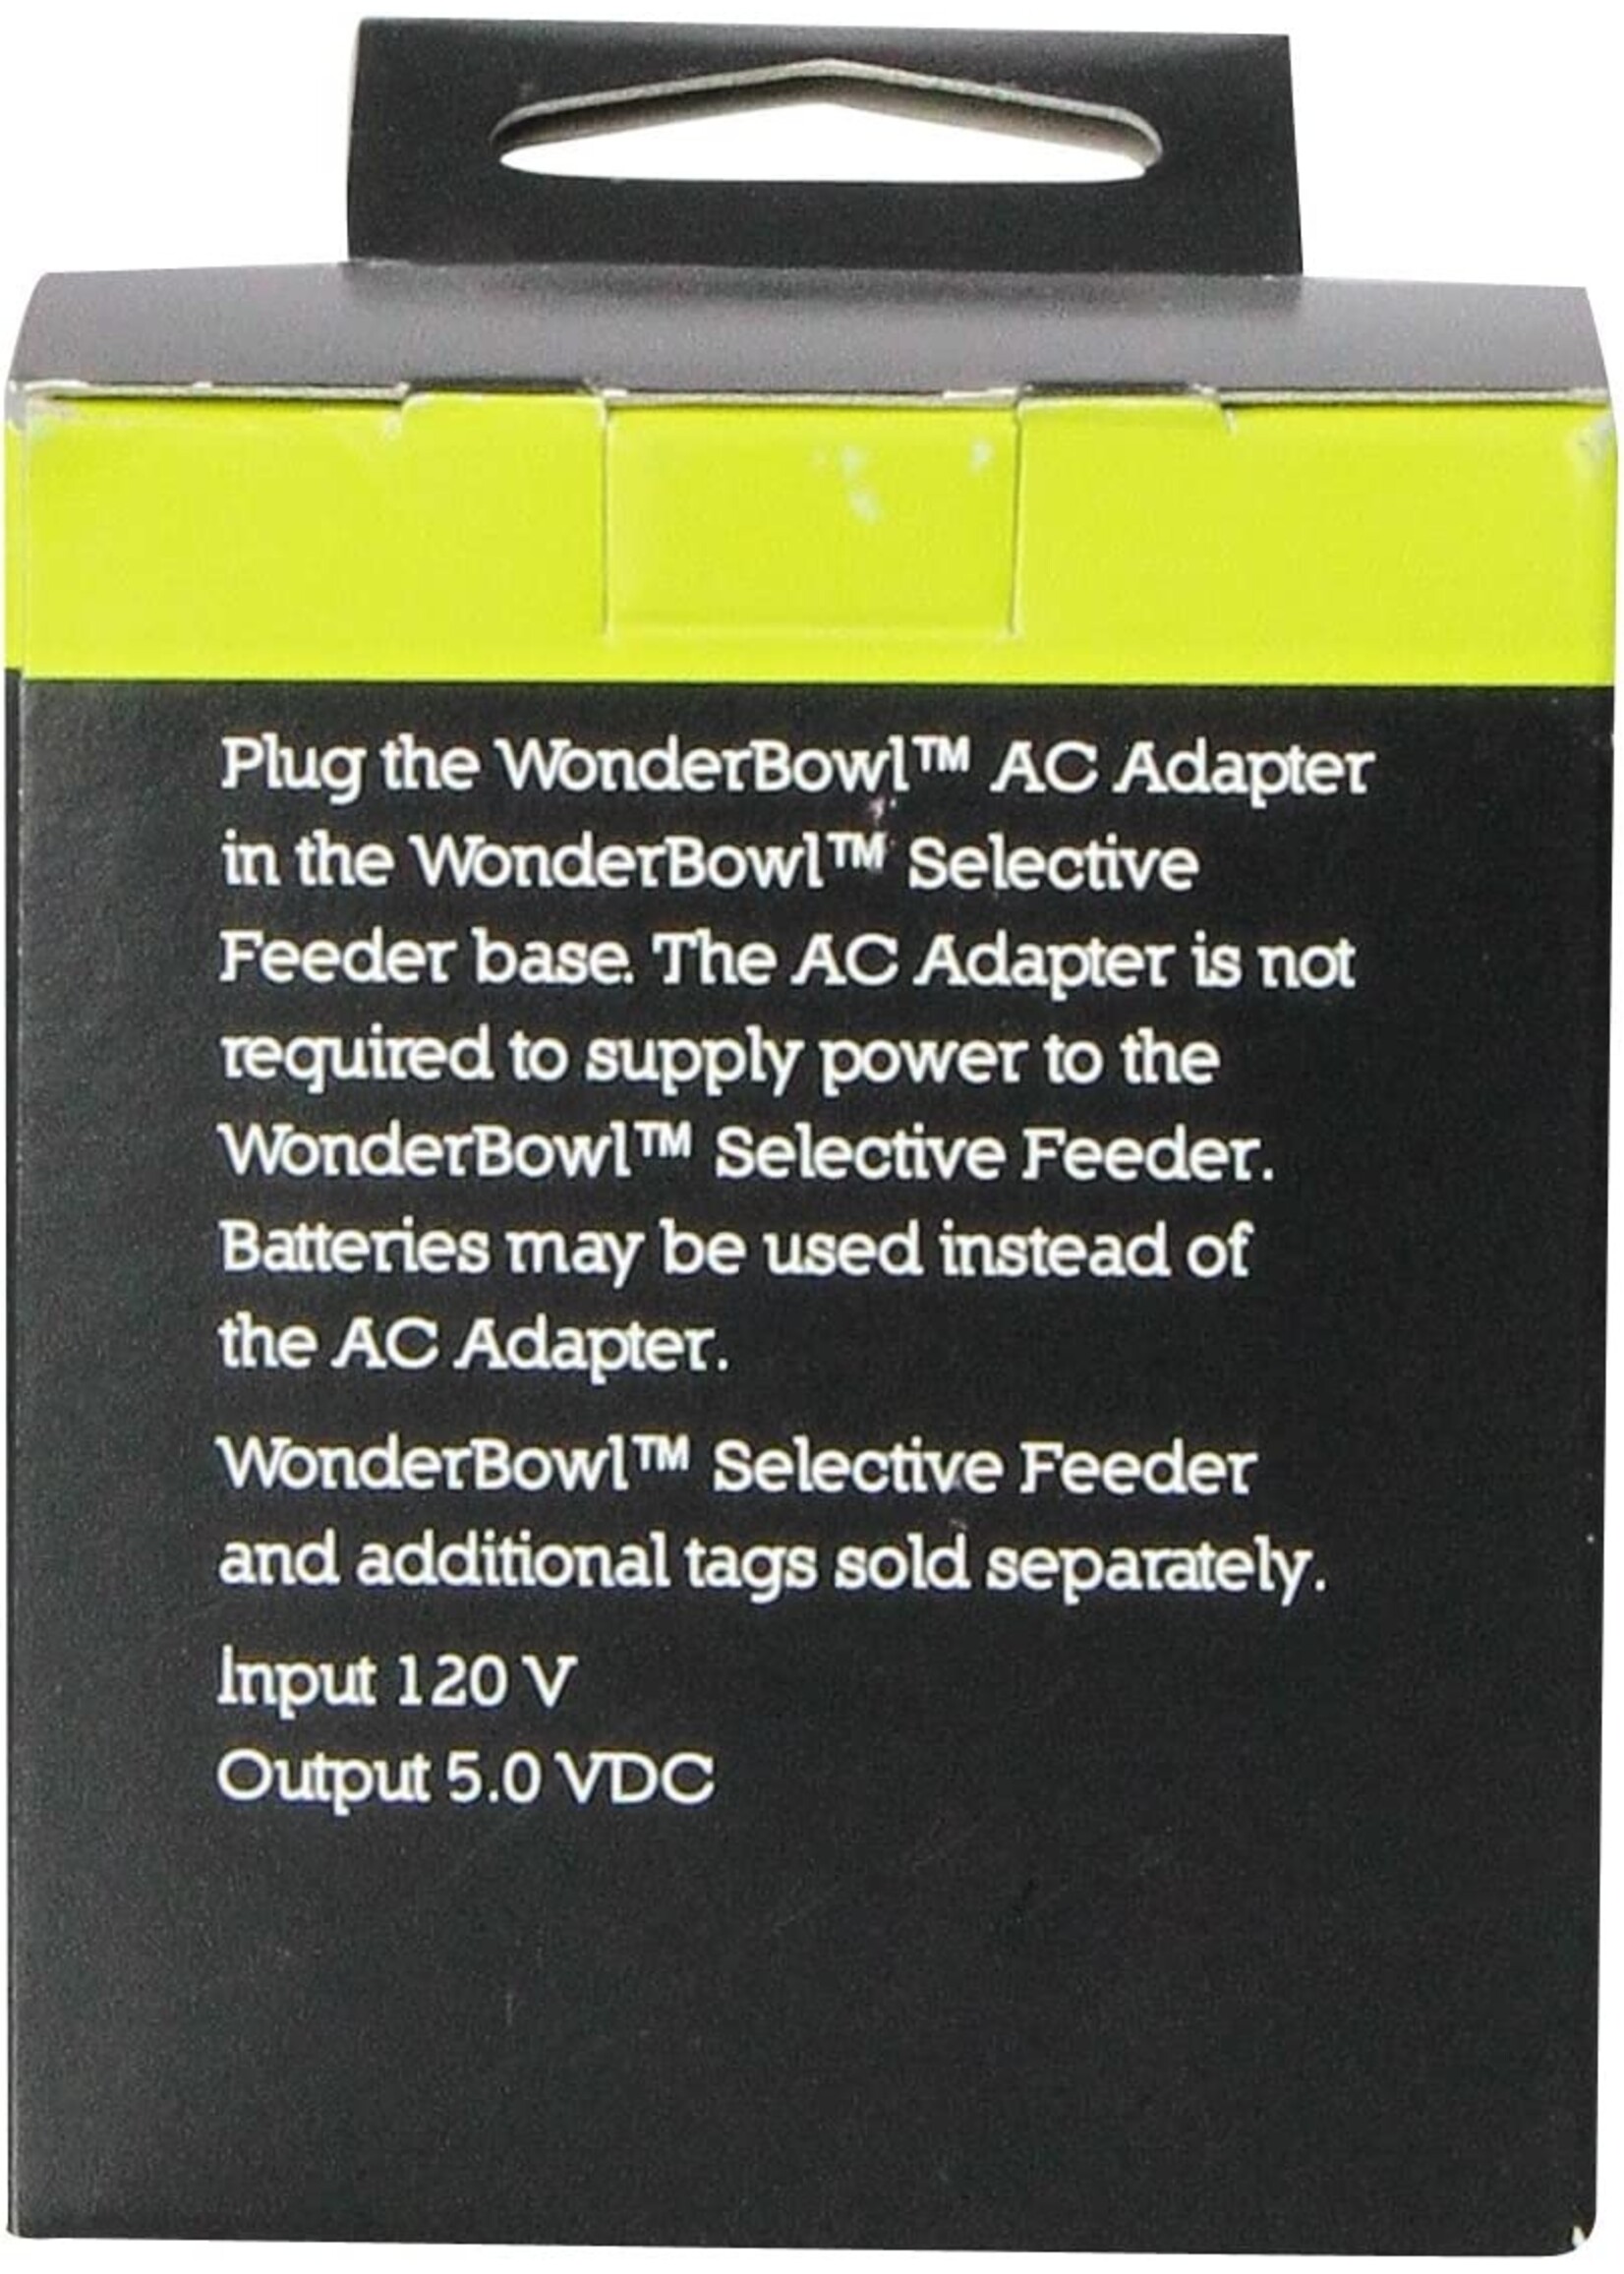 Our Pets AC Adapter fits all wonderbowl